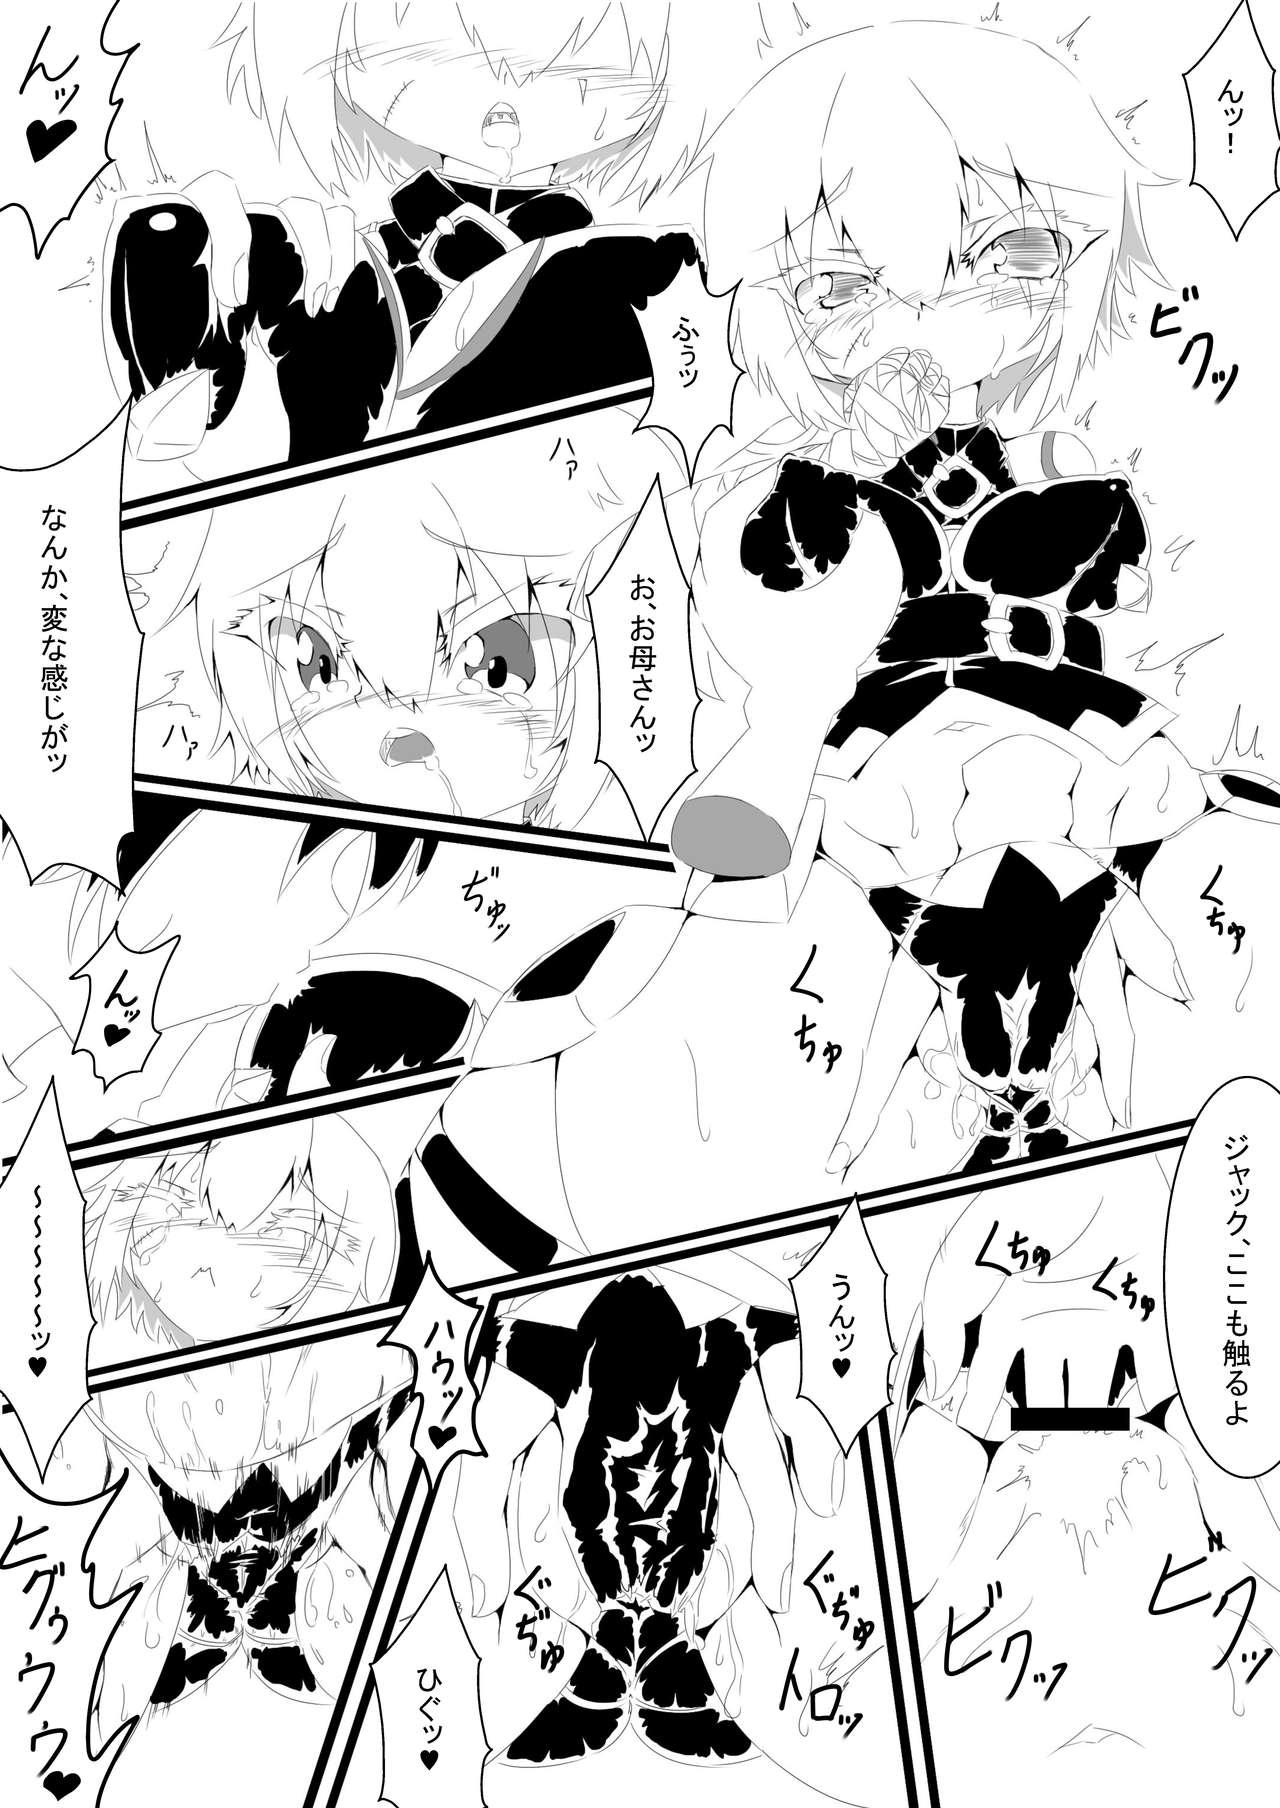 Hardsex [Rothen (Volke.)] Okaa-san to Shitai Jack-chan (Fate/Grand Order) [Digital] - Fate grand order Amature Sex Tapes - Page 7